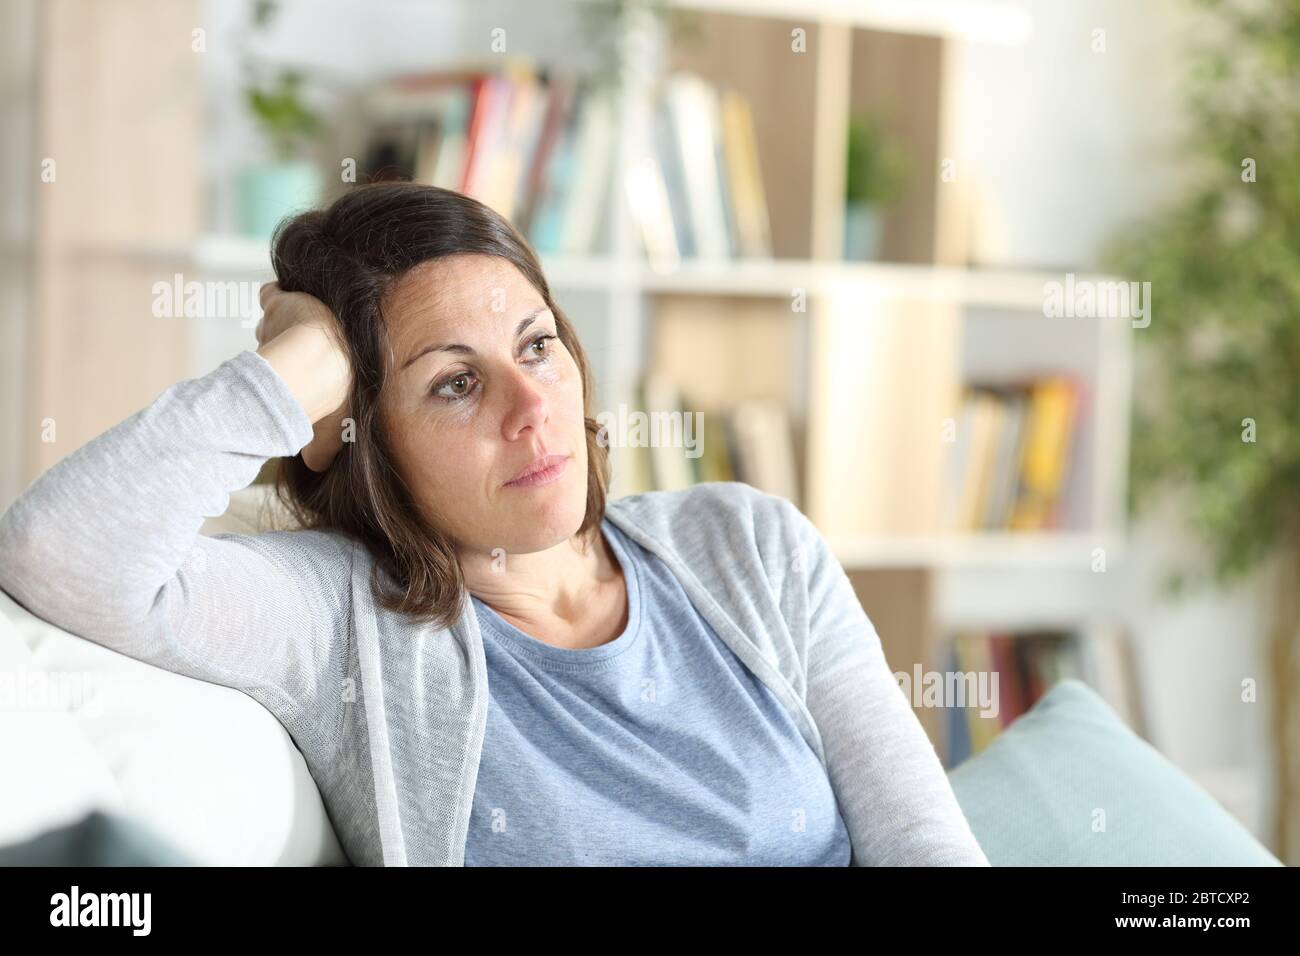 Pensive adult woman thinking looking away sitting on the couch at home Stock Photo